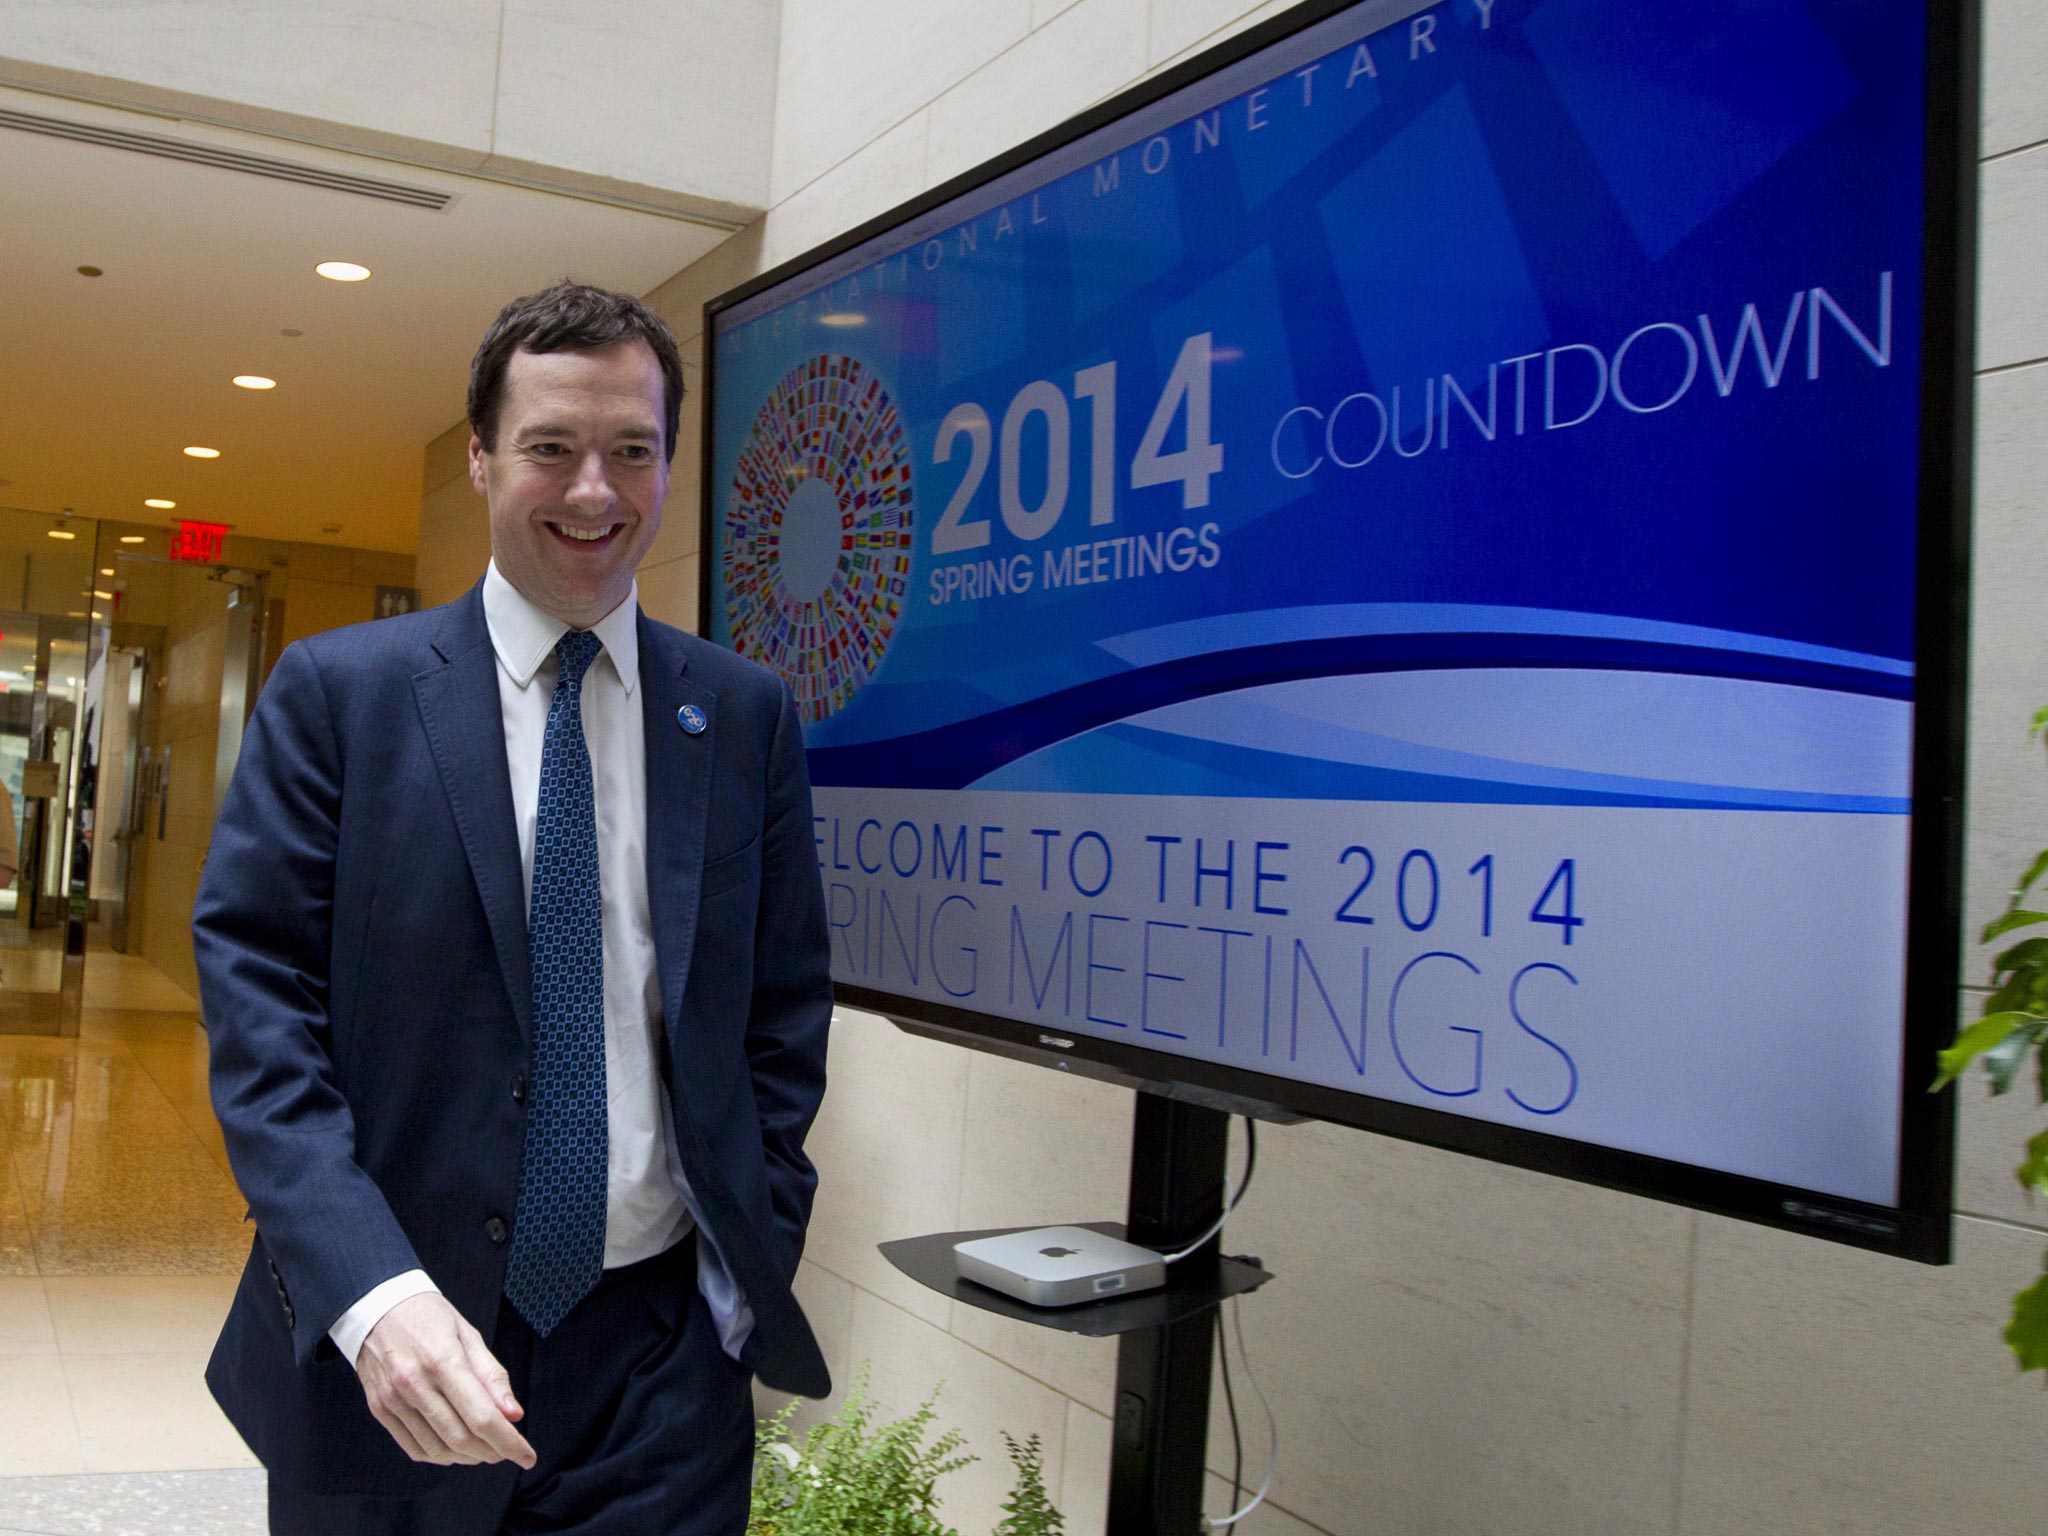 The Chancellor plans to crack down hard on tax evasion and those hiding money in tax havens